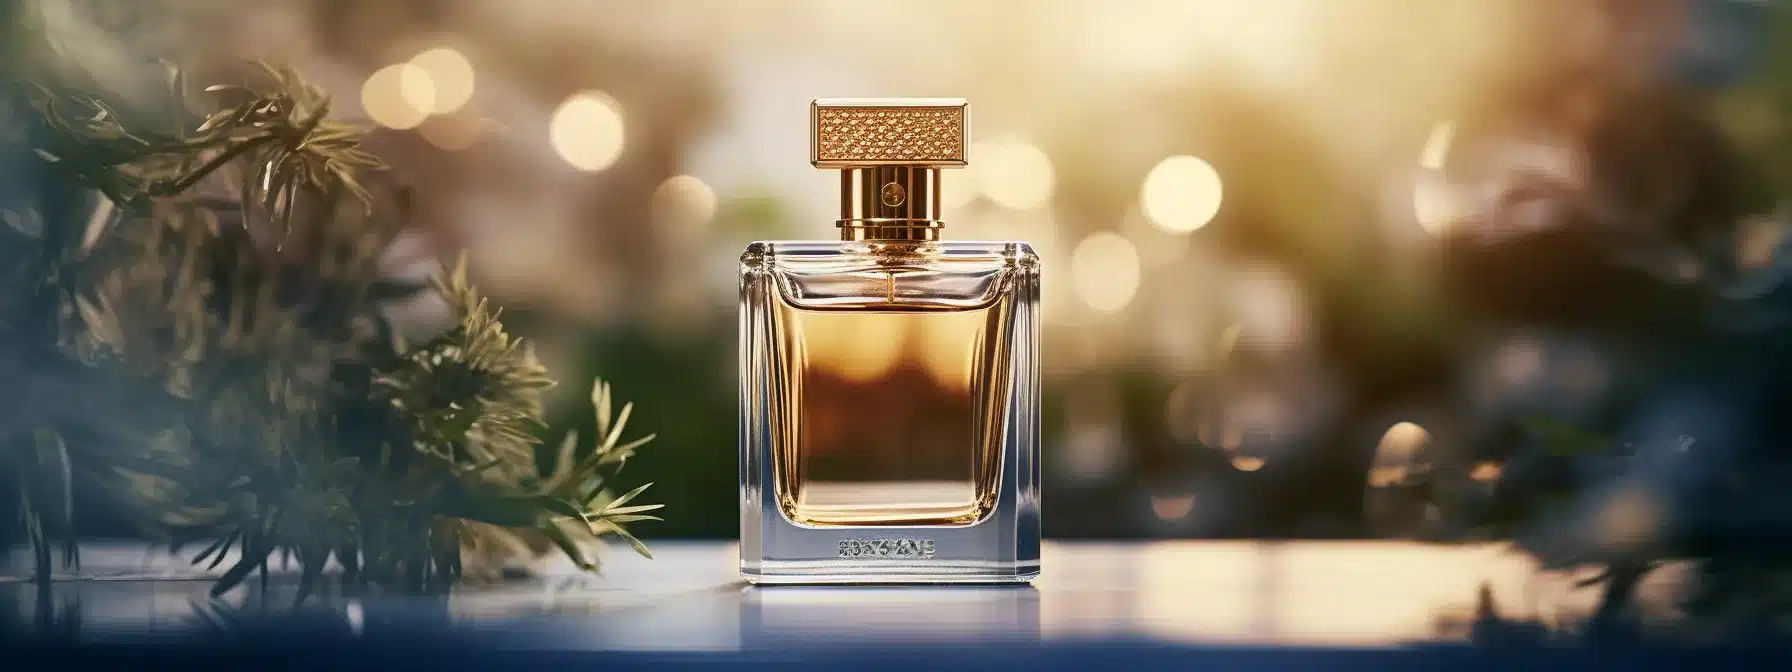 A Close-Up Shot Of A Luxurious Perfume Bottle With A Soft Focus Background Emphasizing Its Distinct And Sublime Aura.